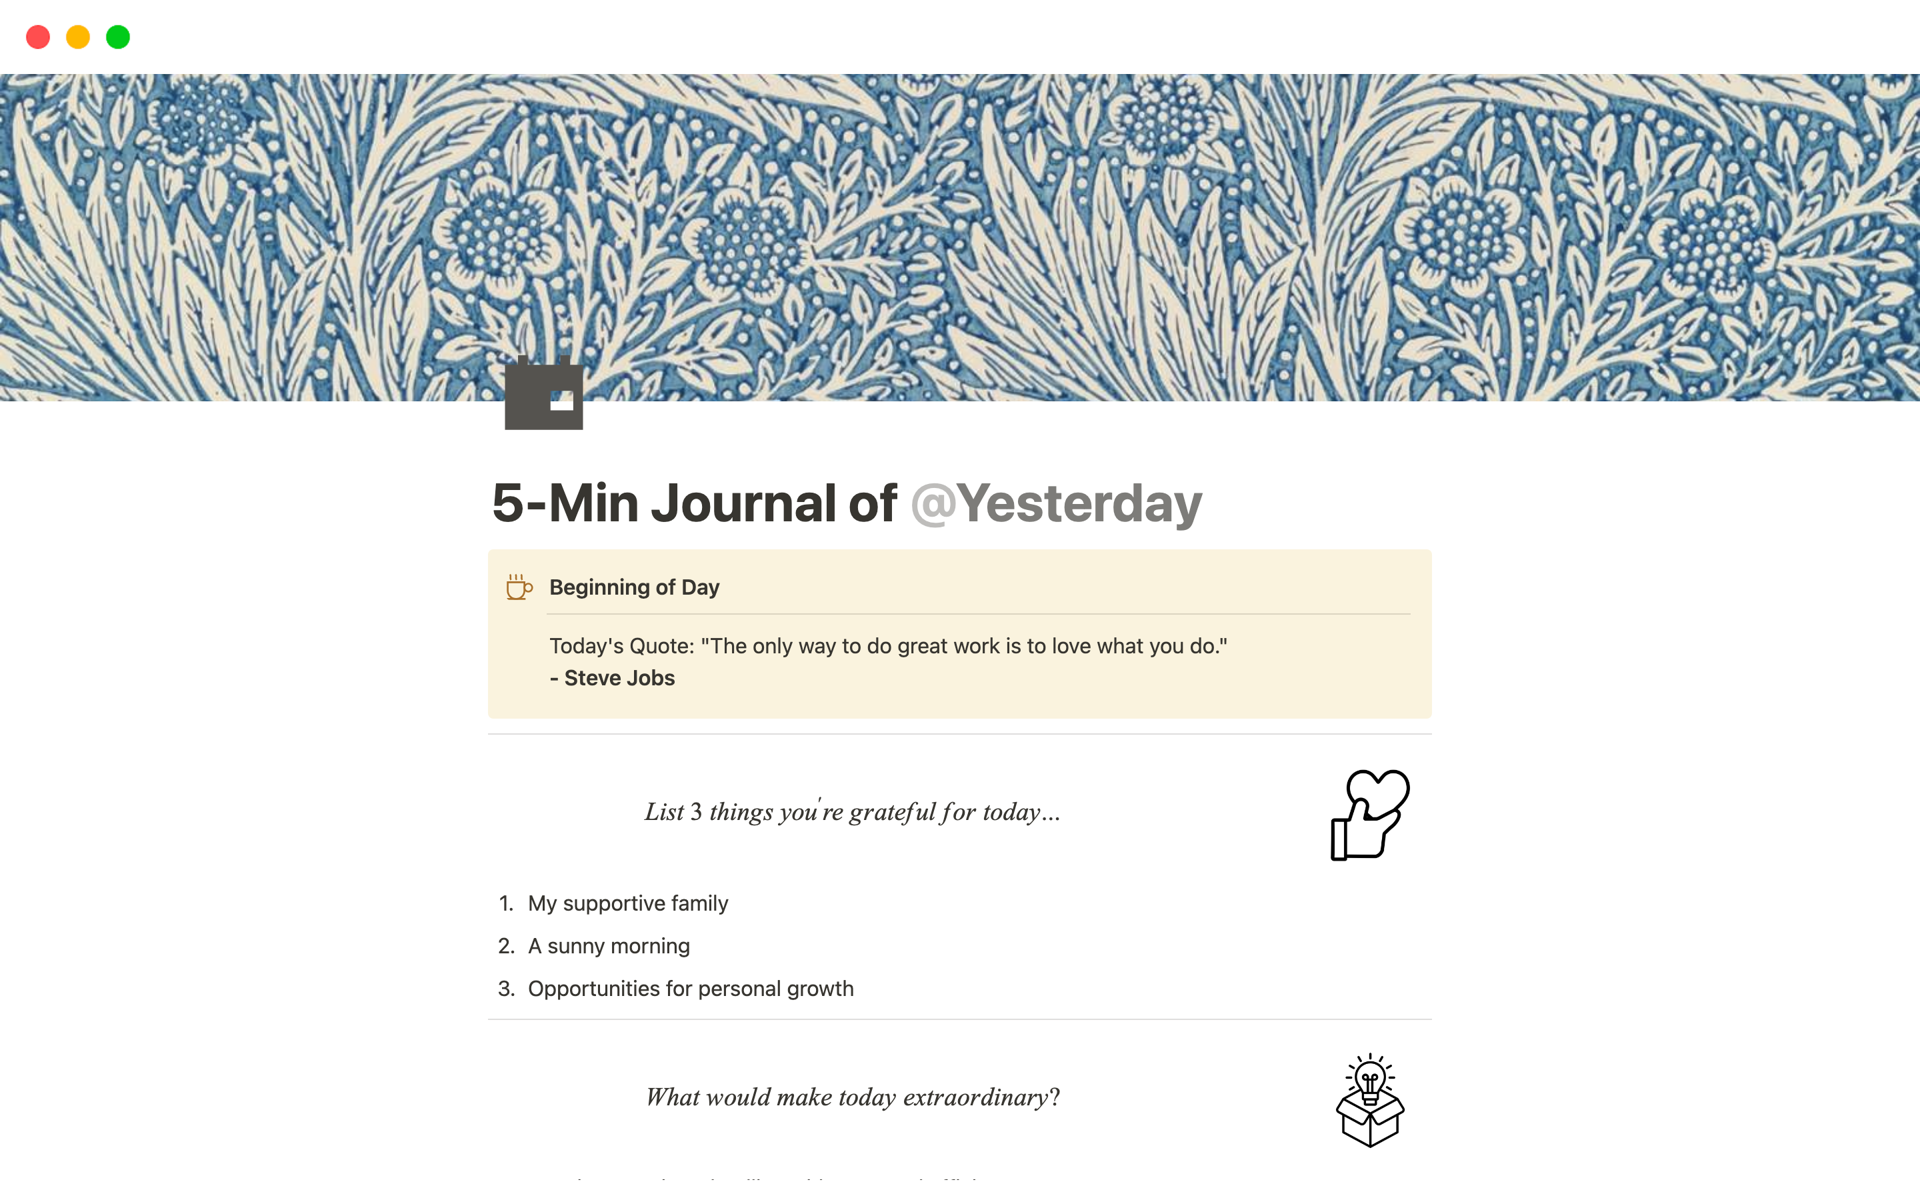 5-Minute Journal Notion template is made to help you integrate positive and self-reflective actions into your daily routine.